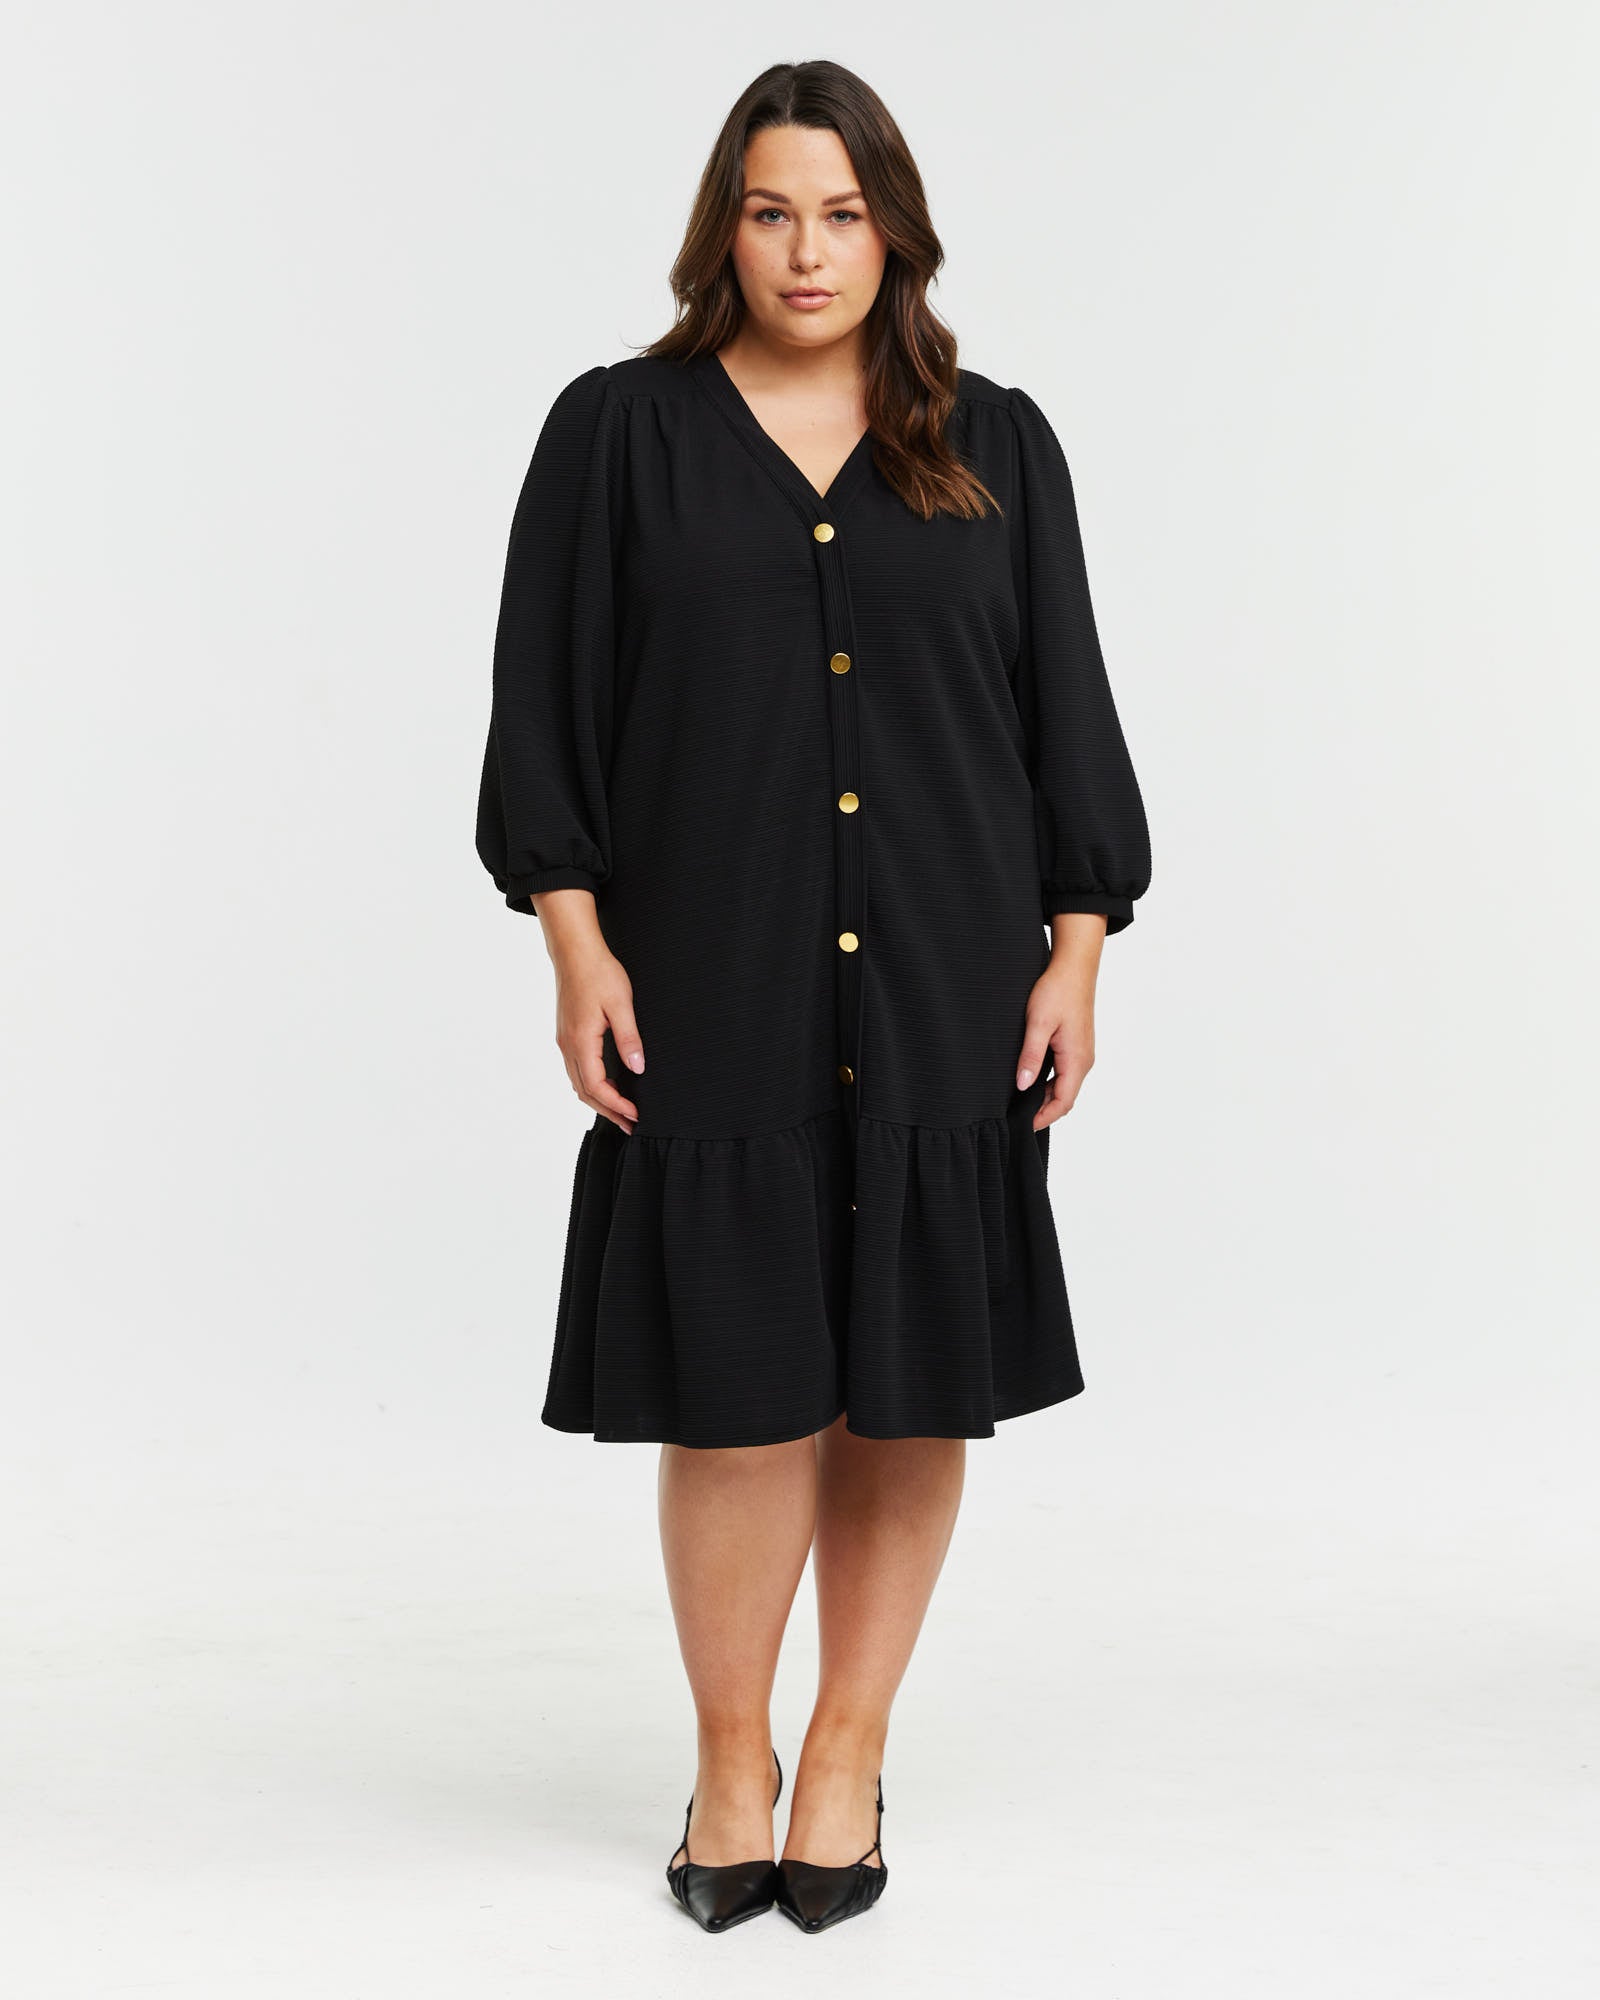 A plus size woman wearing the Elissa Dress, a black button down dress with gold hardware detailing.